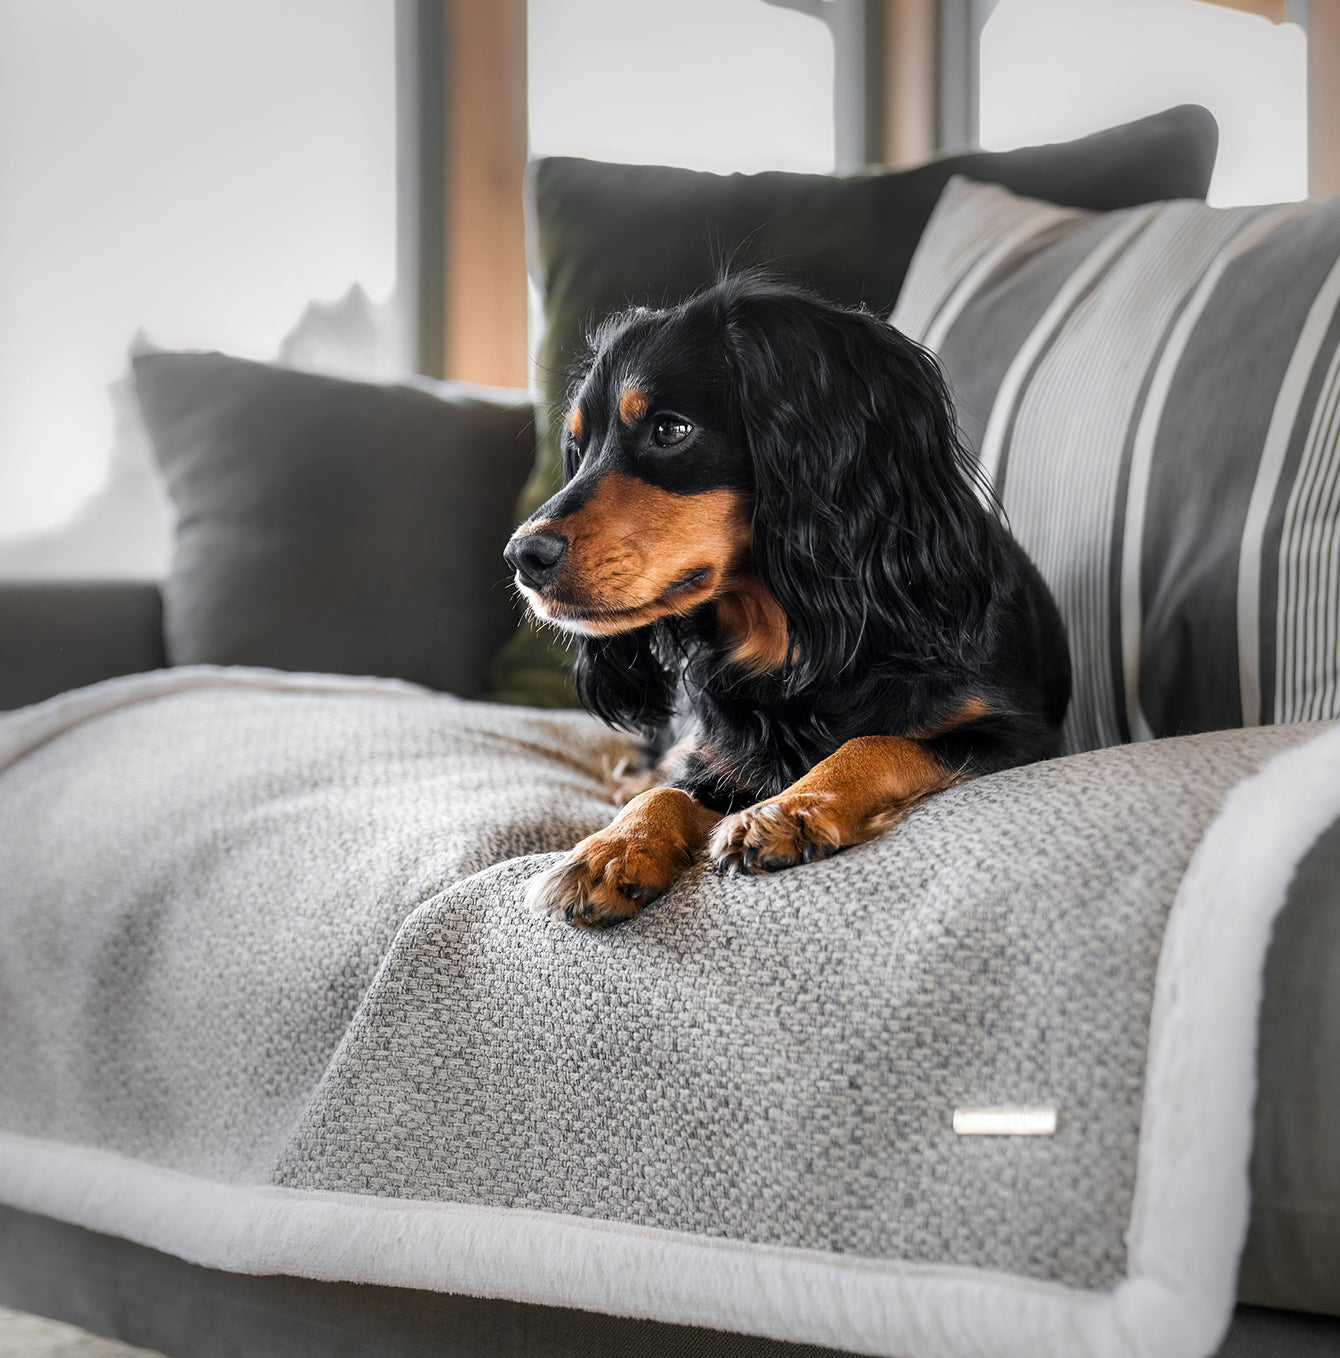 Present your furry friend with our luxuriously thick, plush blanket for your pet. Featuring a reverse side with hardwearing woven fabric handmade in Italy for the perfect high-quality pet blanket! Essentials Herdwick Blanket In Pebble, Available now at Lords & Labradors US